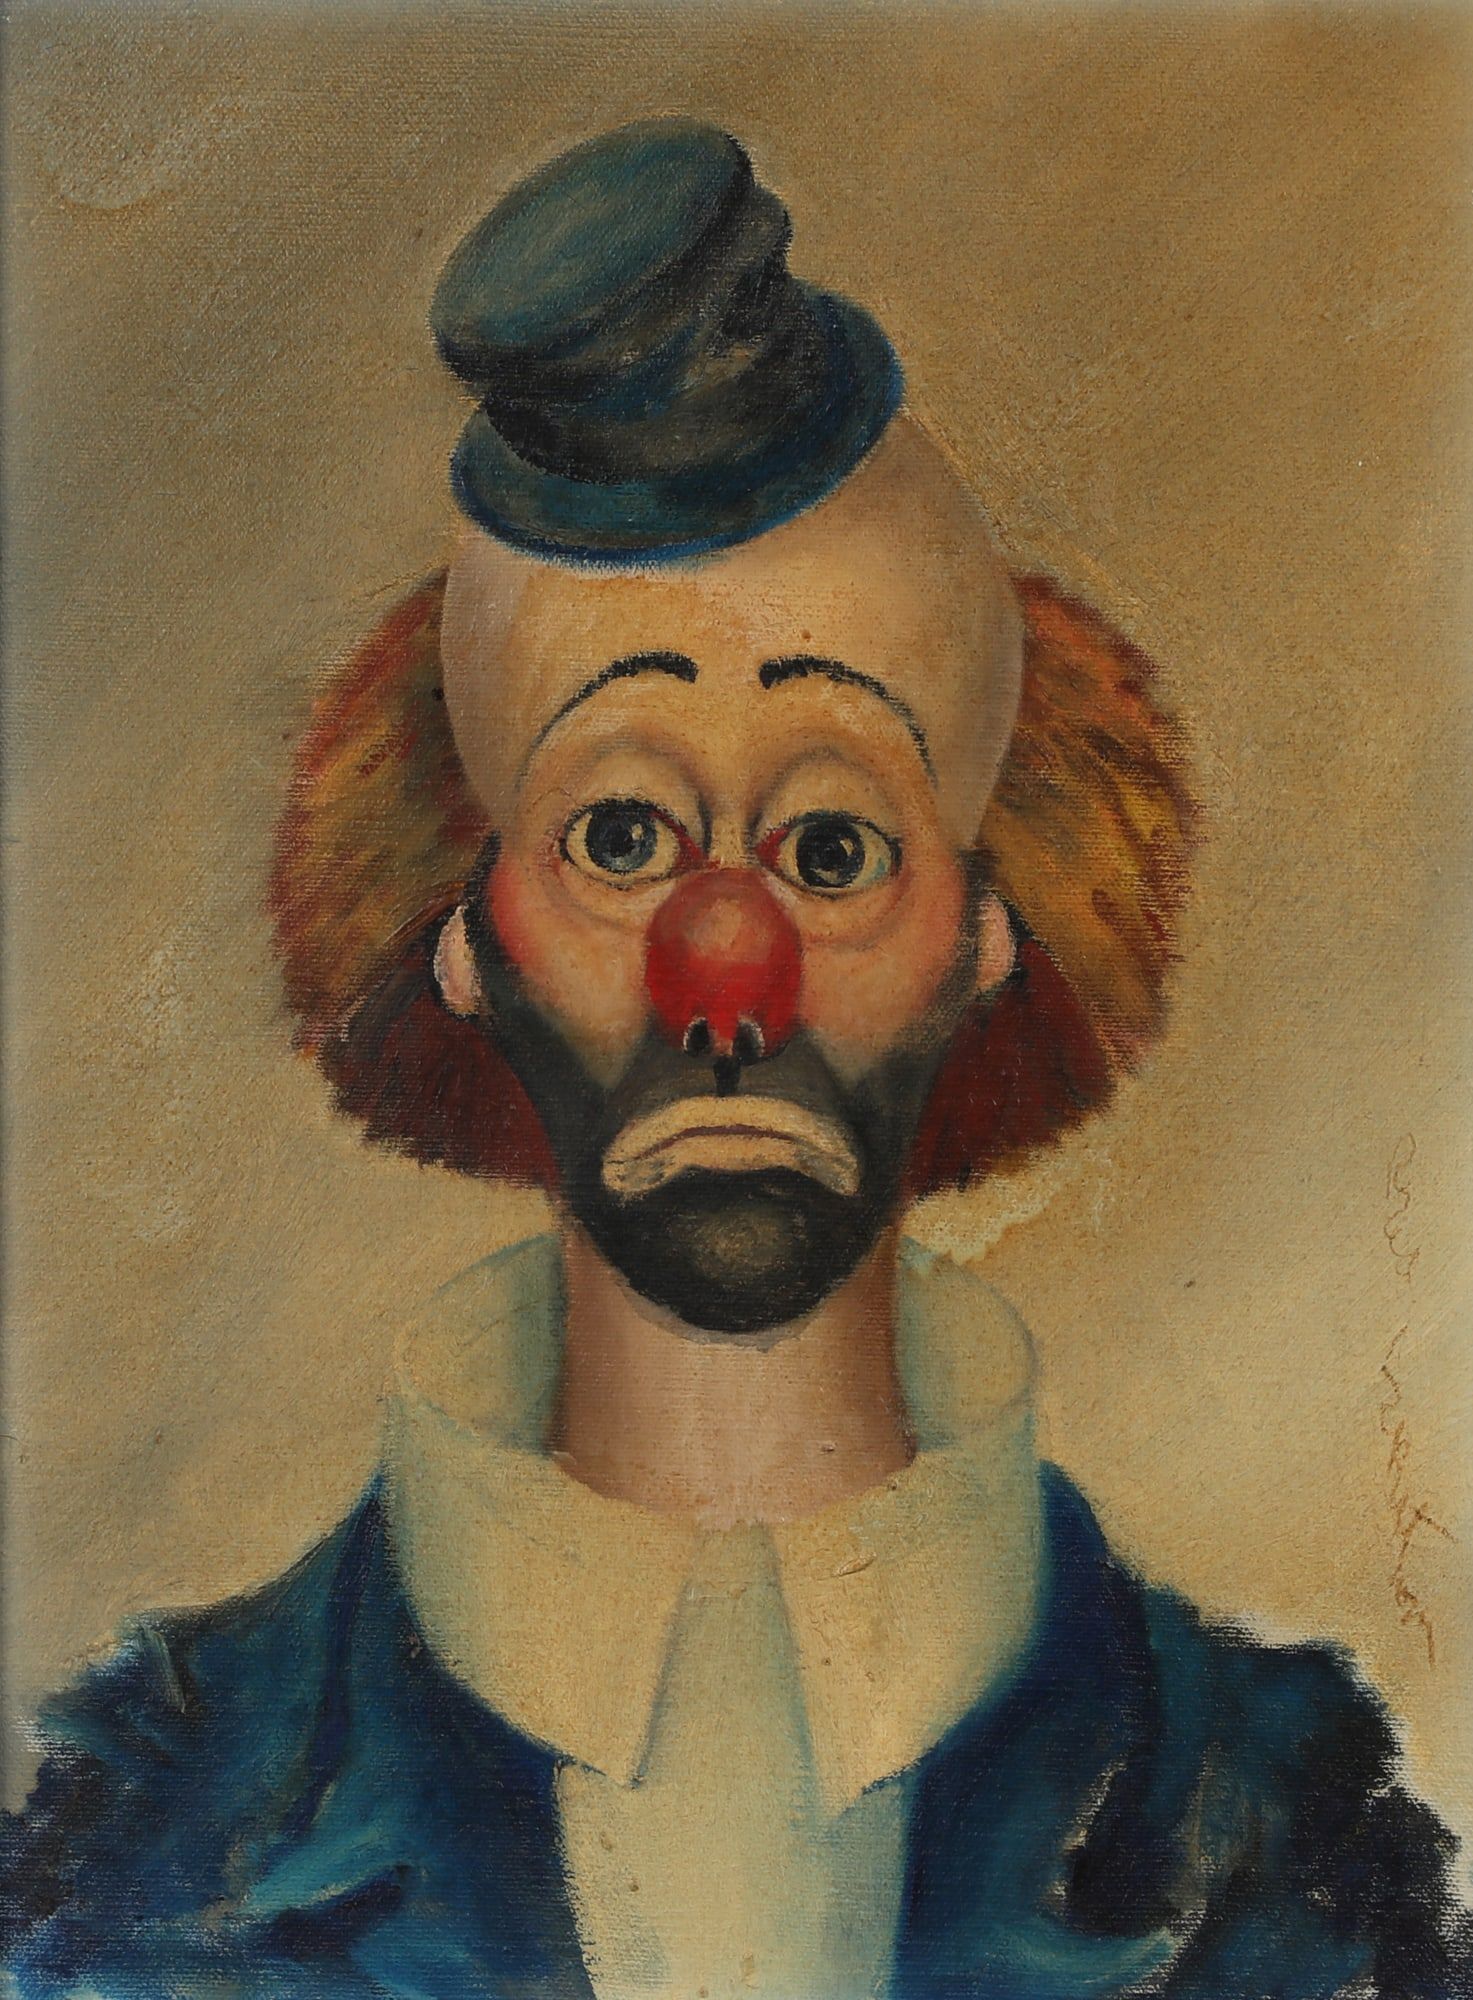 RED SKELTON, CLOWN WITH A BLUE